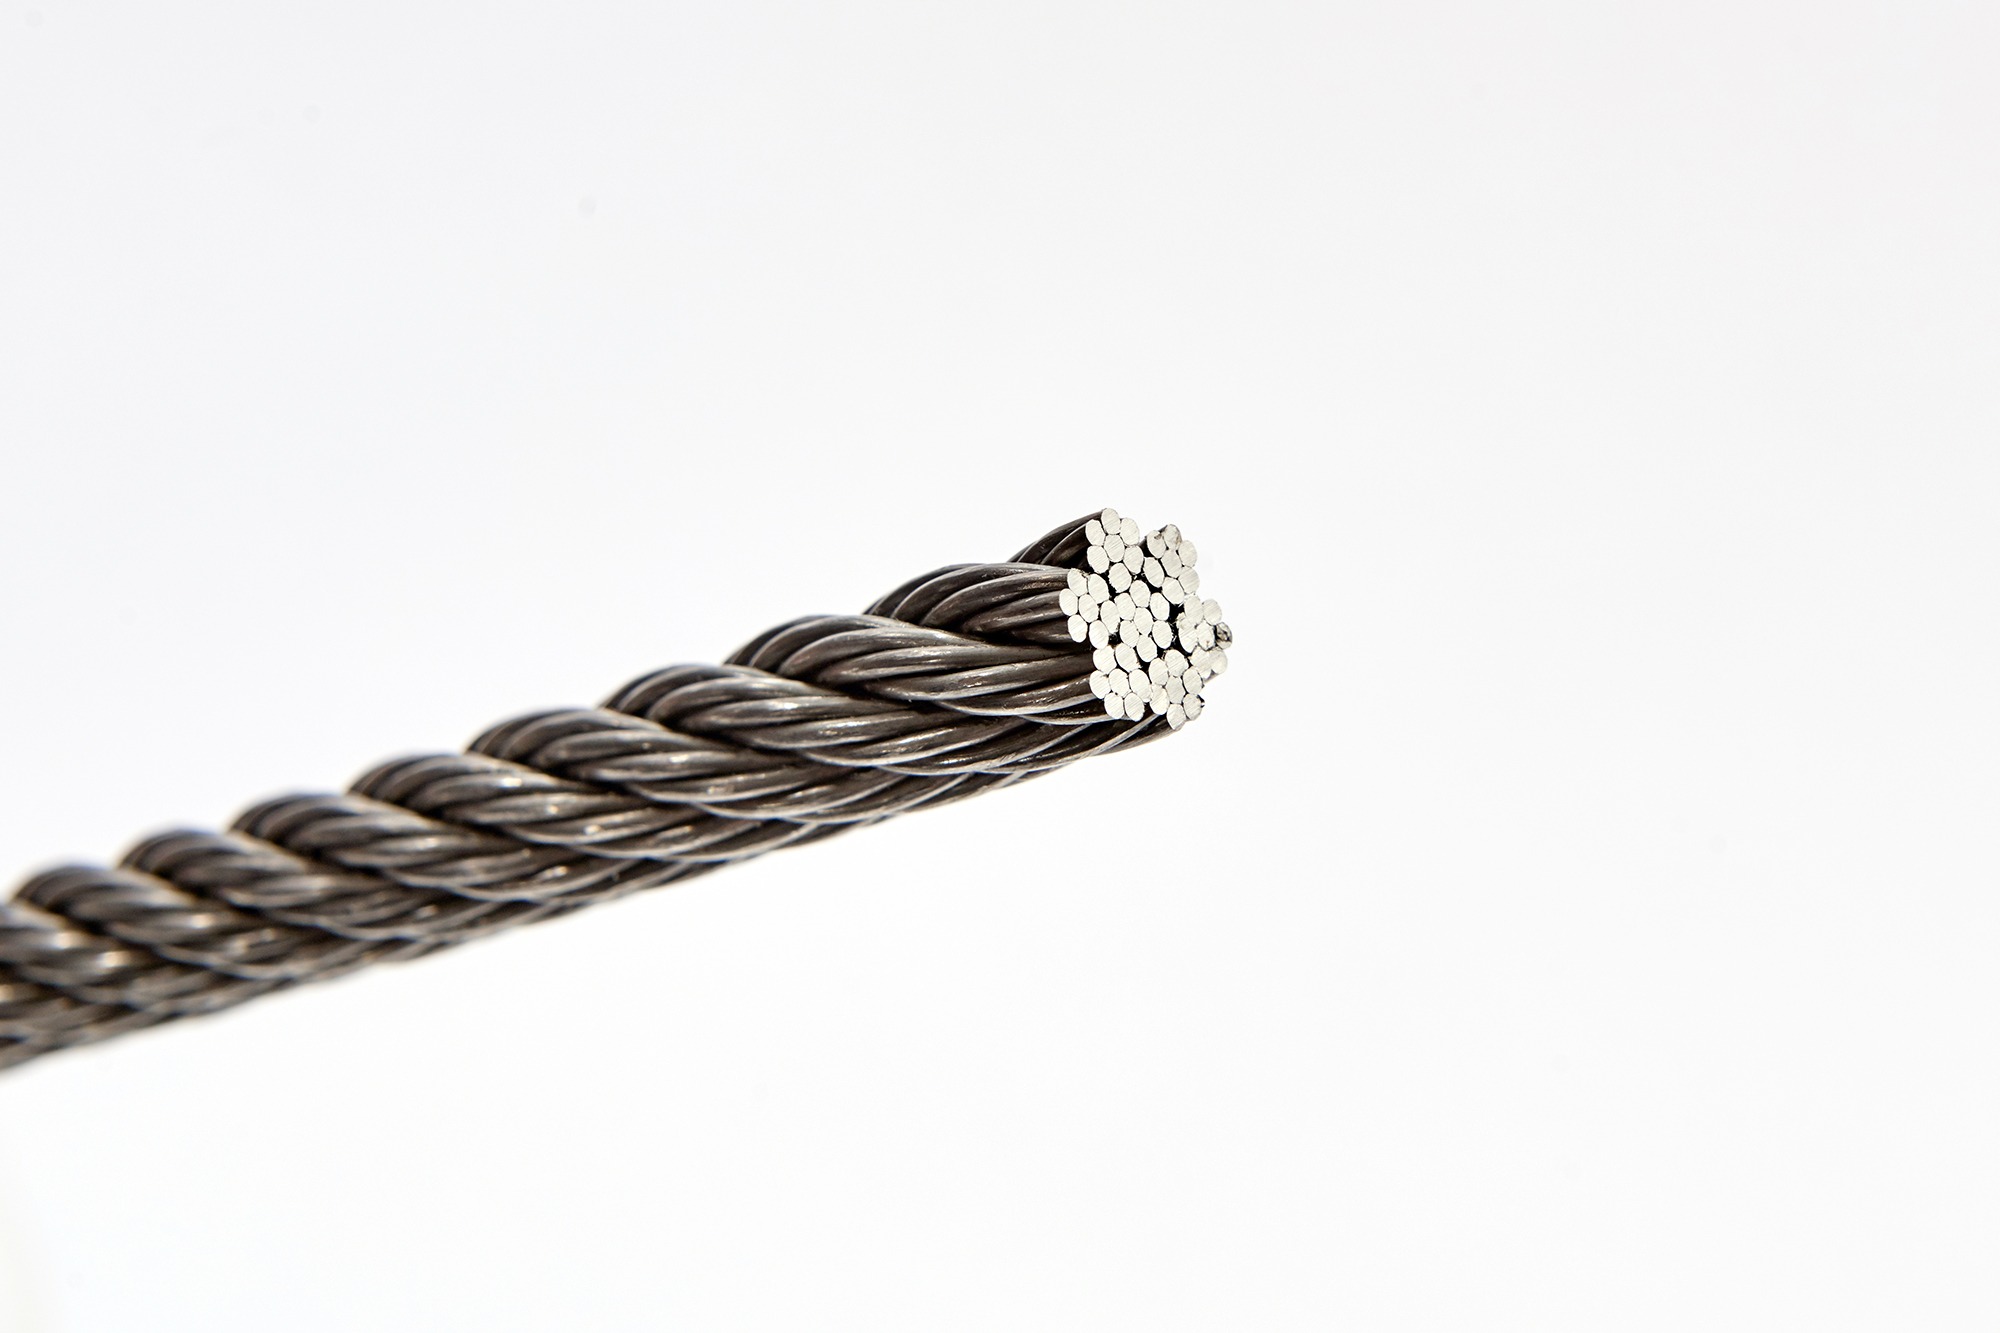 Rene 41 is available in bars and wire rope